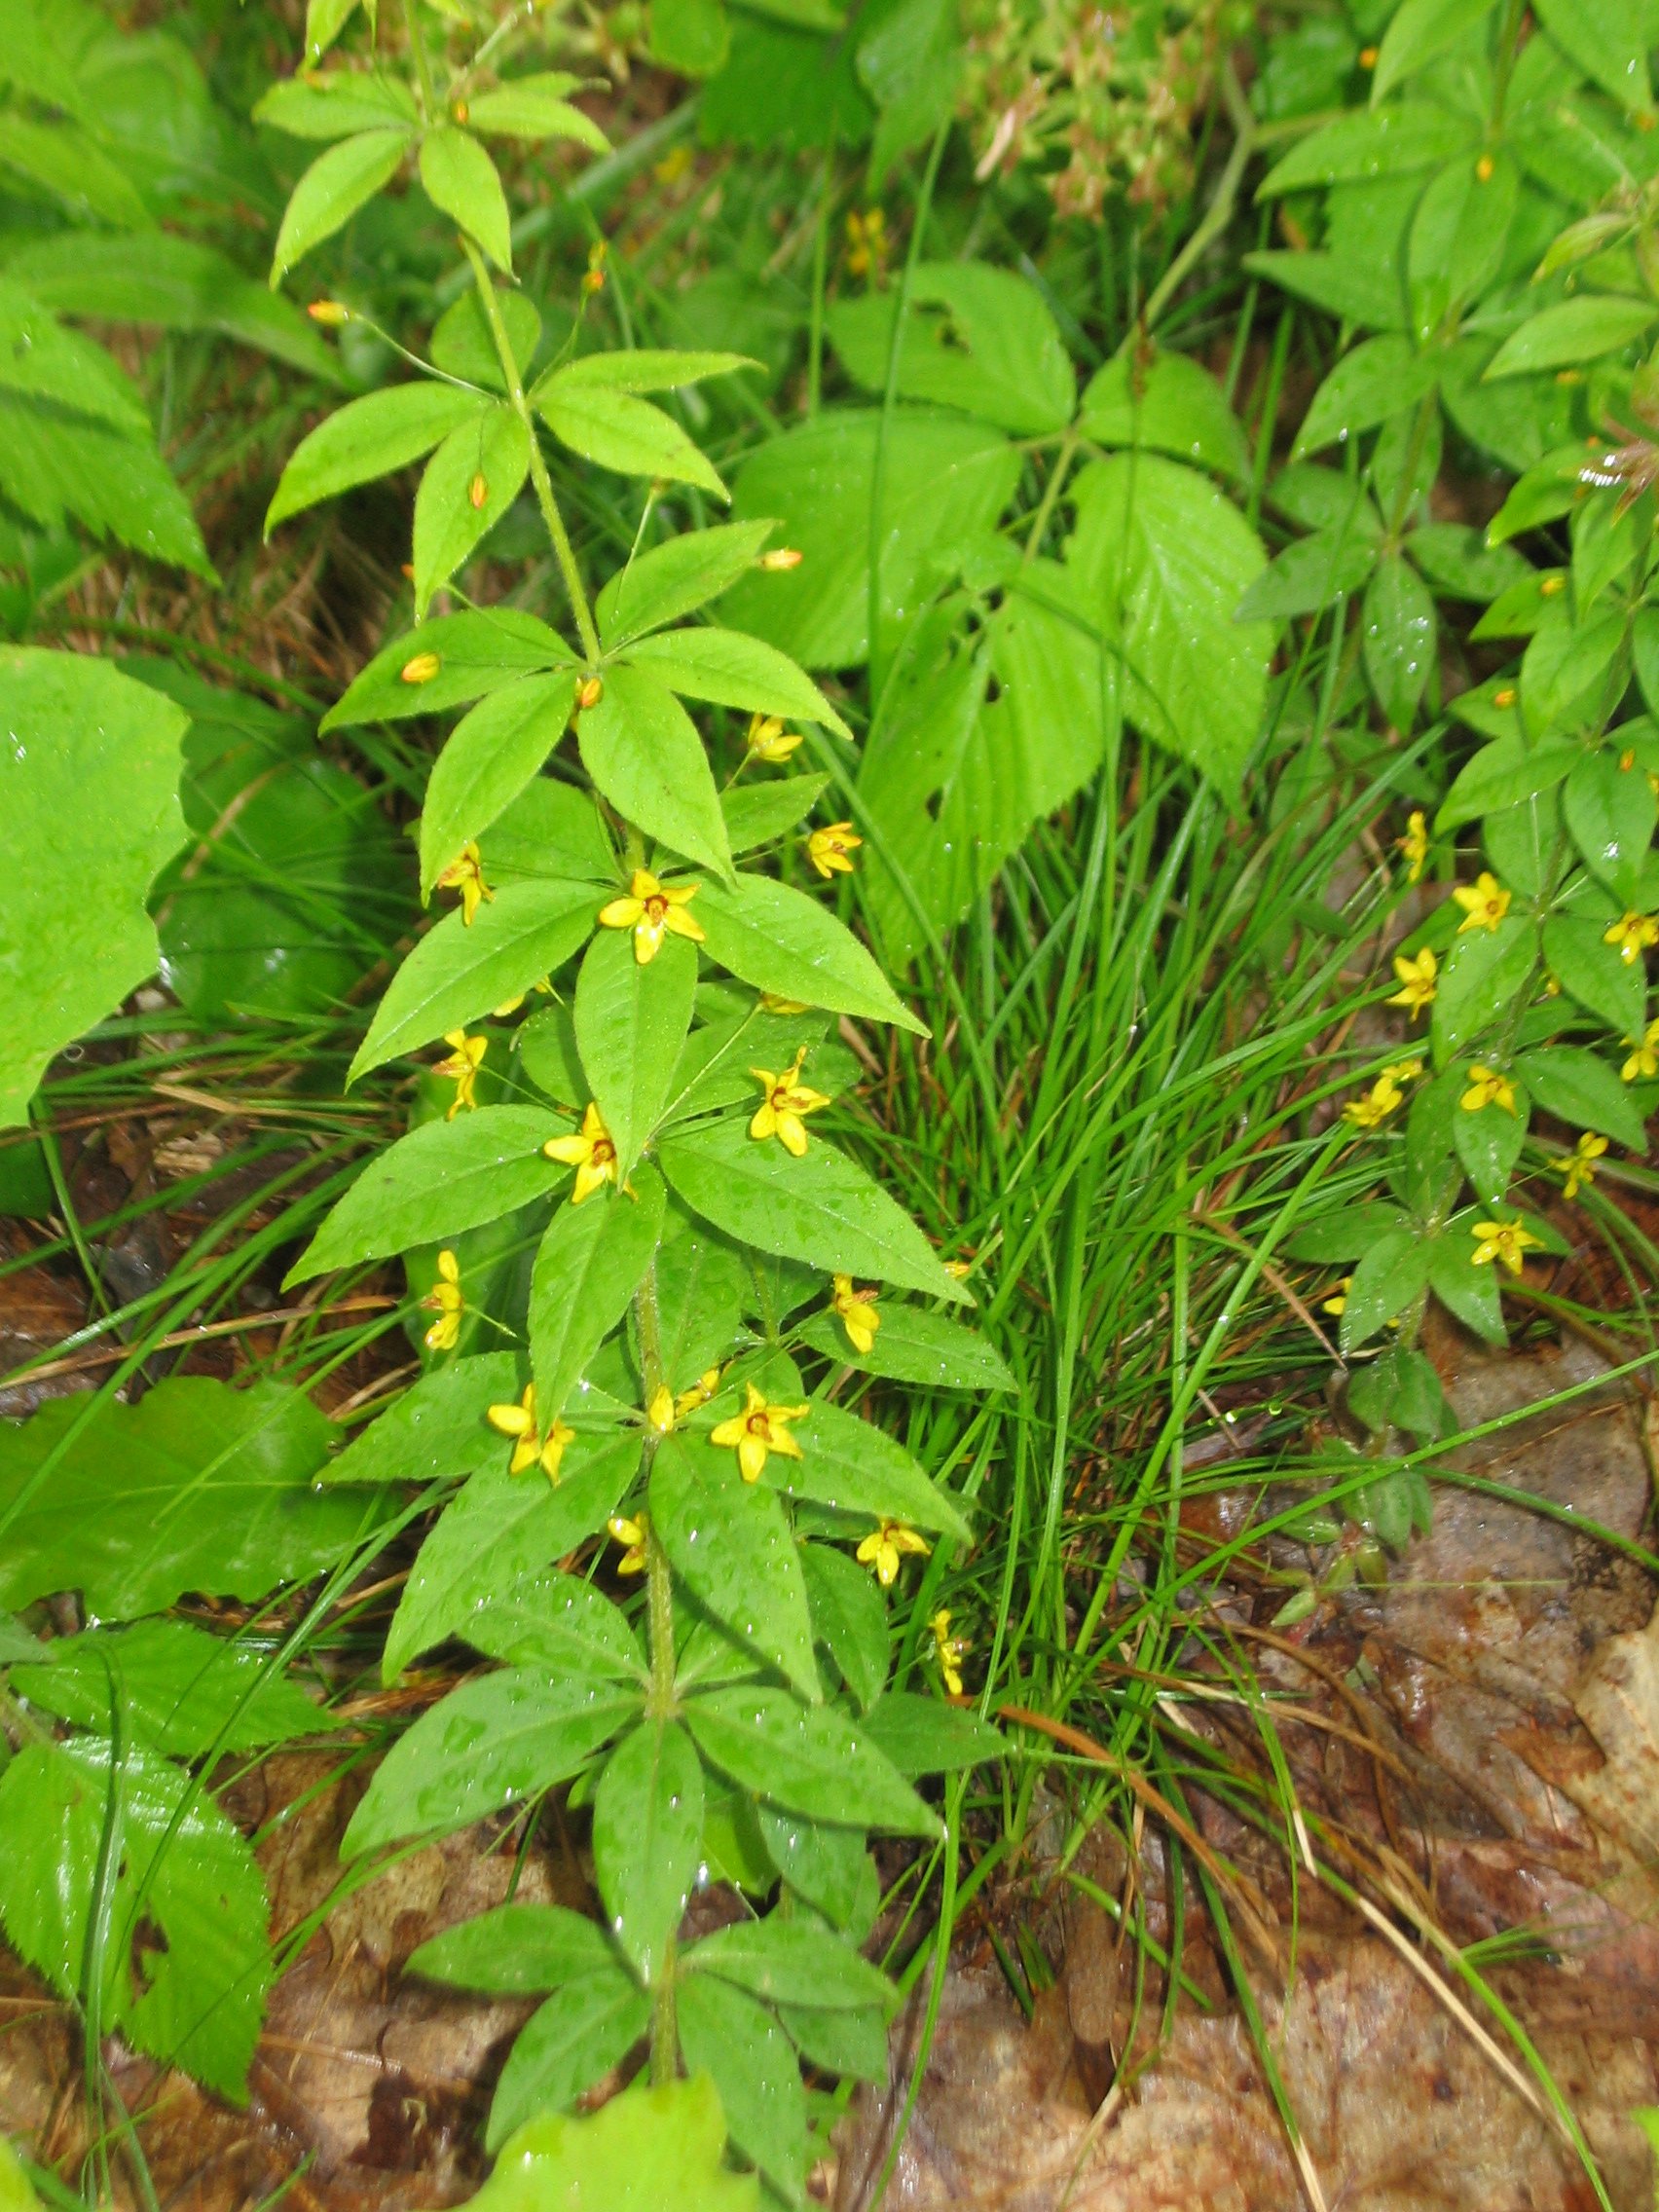 Full plant photo of four-flowered yellow loosestrife